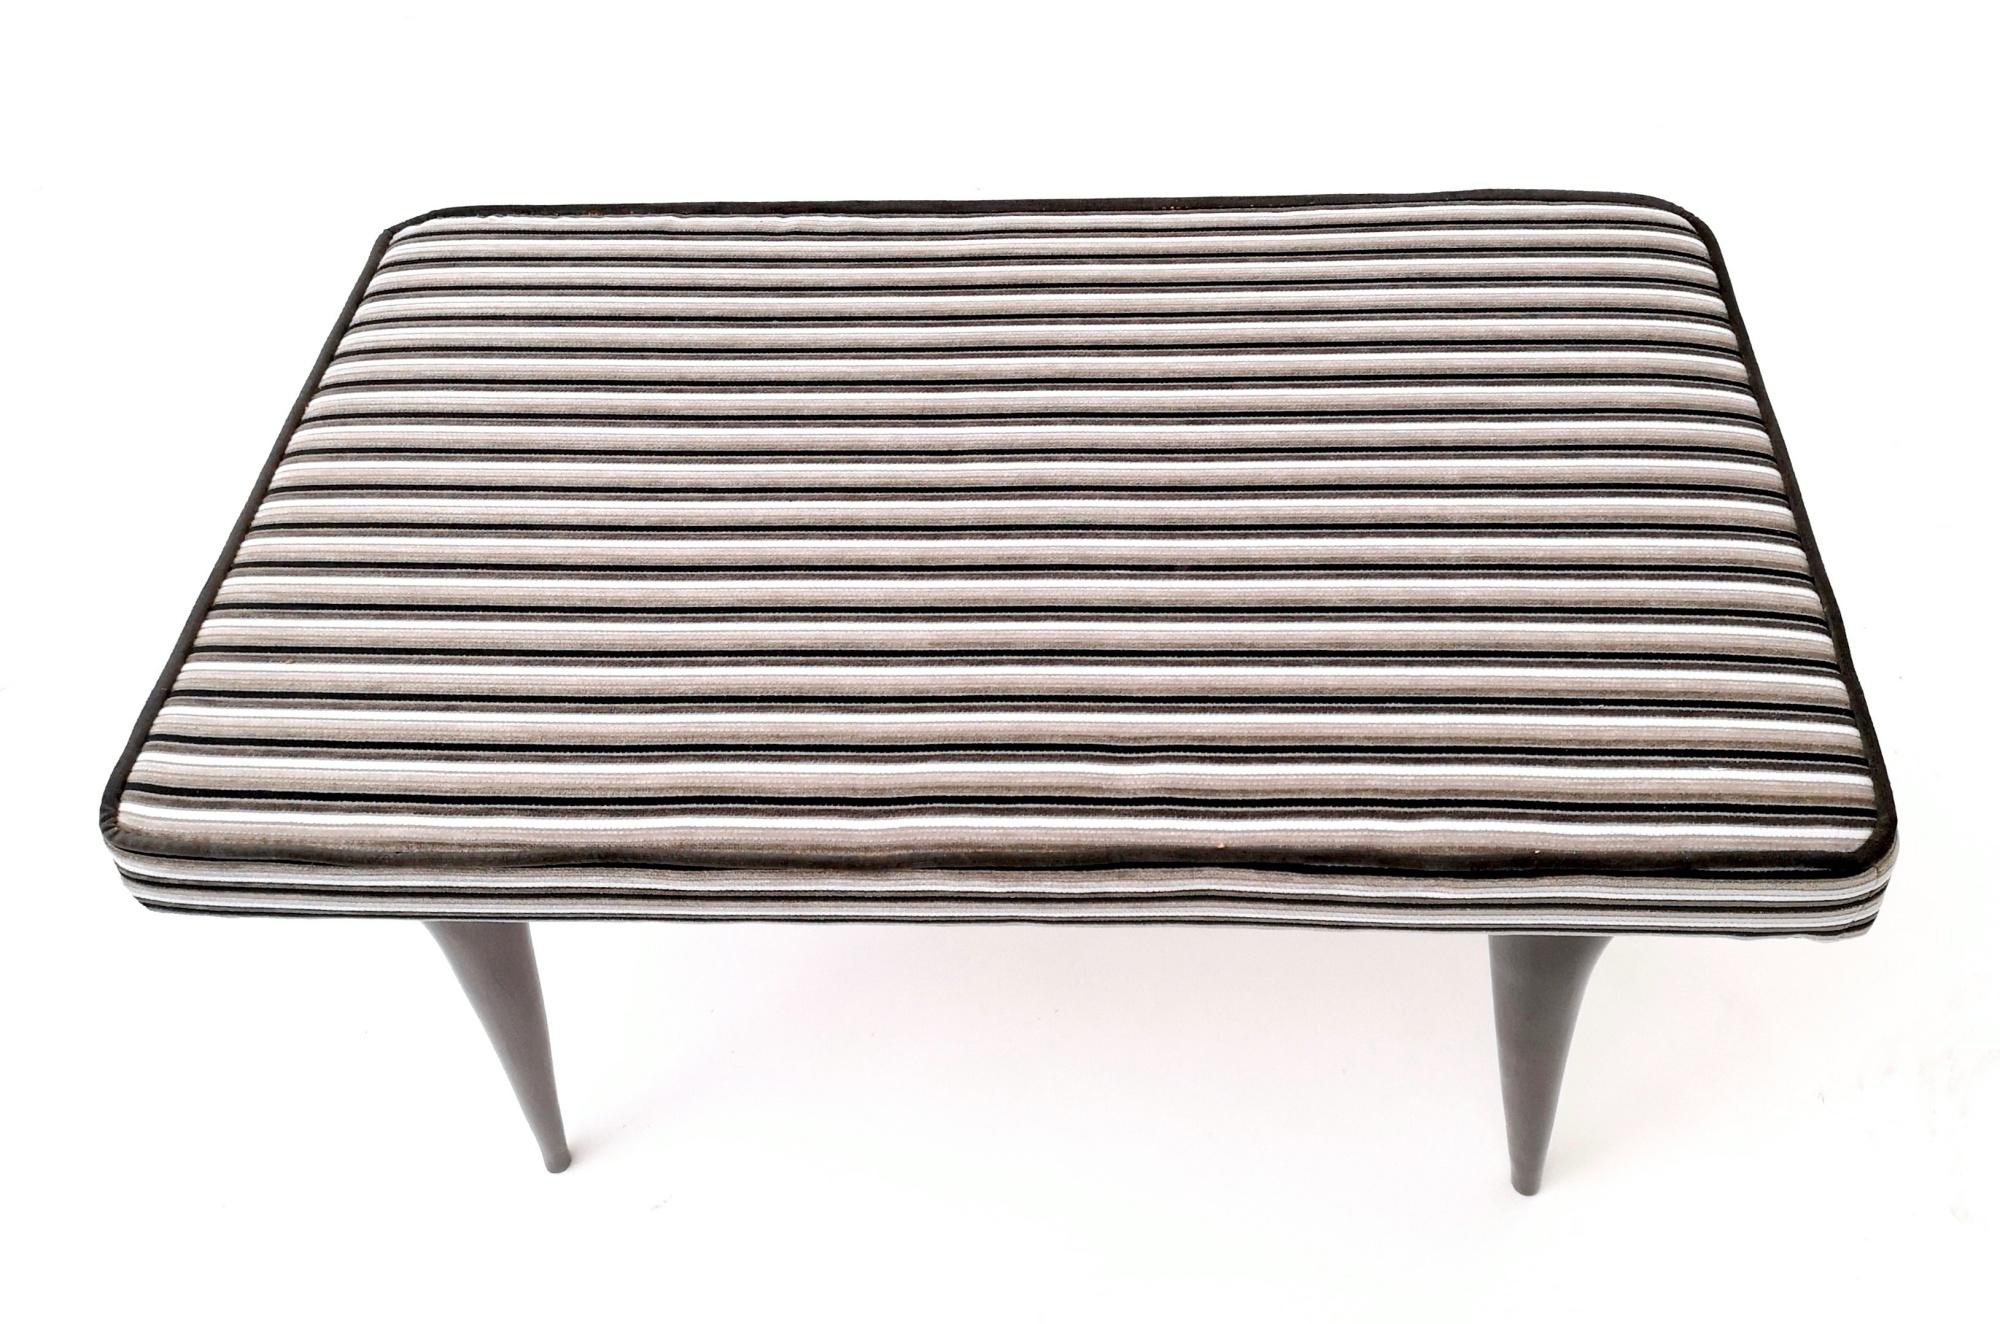 Italian Vintage Bench Upholstered in Velvet with a Black, Gray and White Striped Pattern